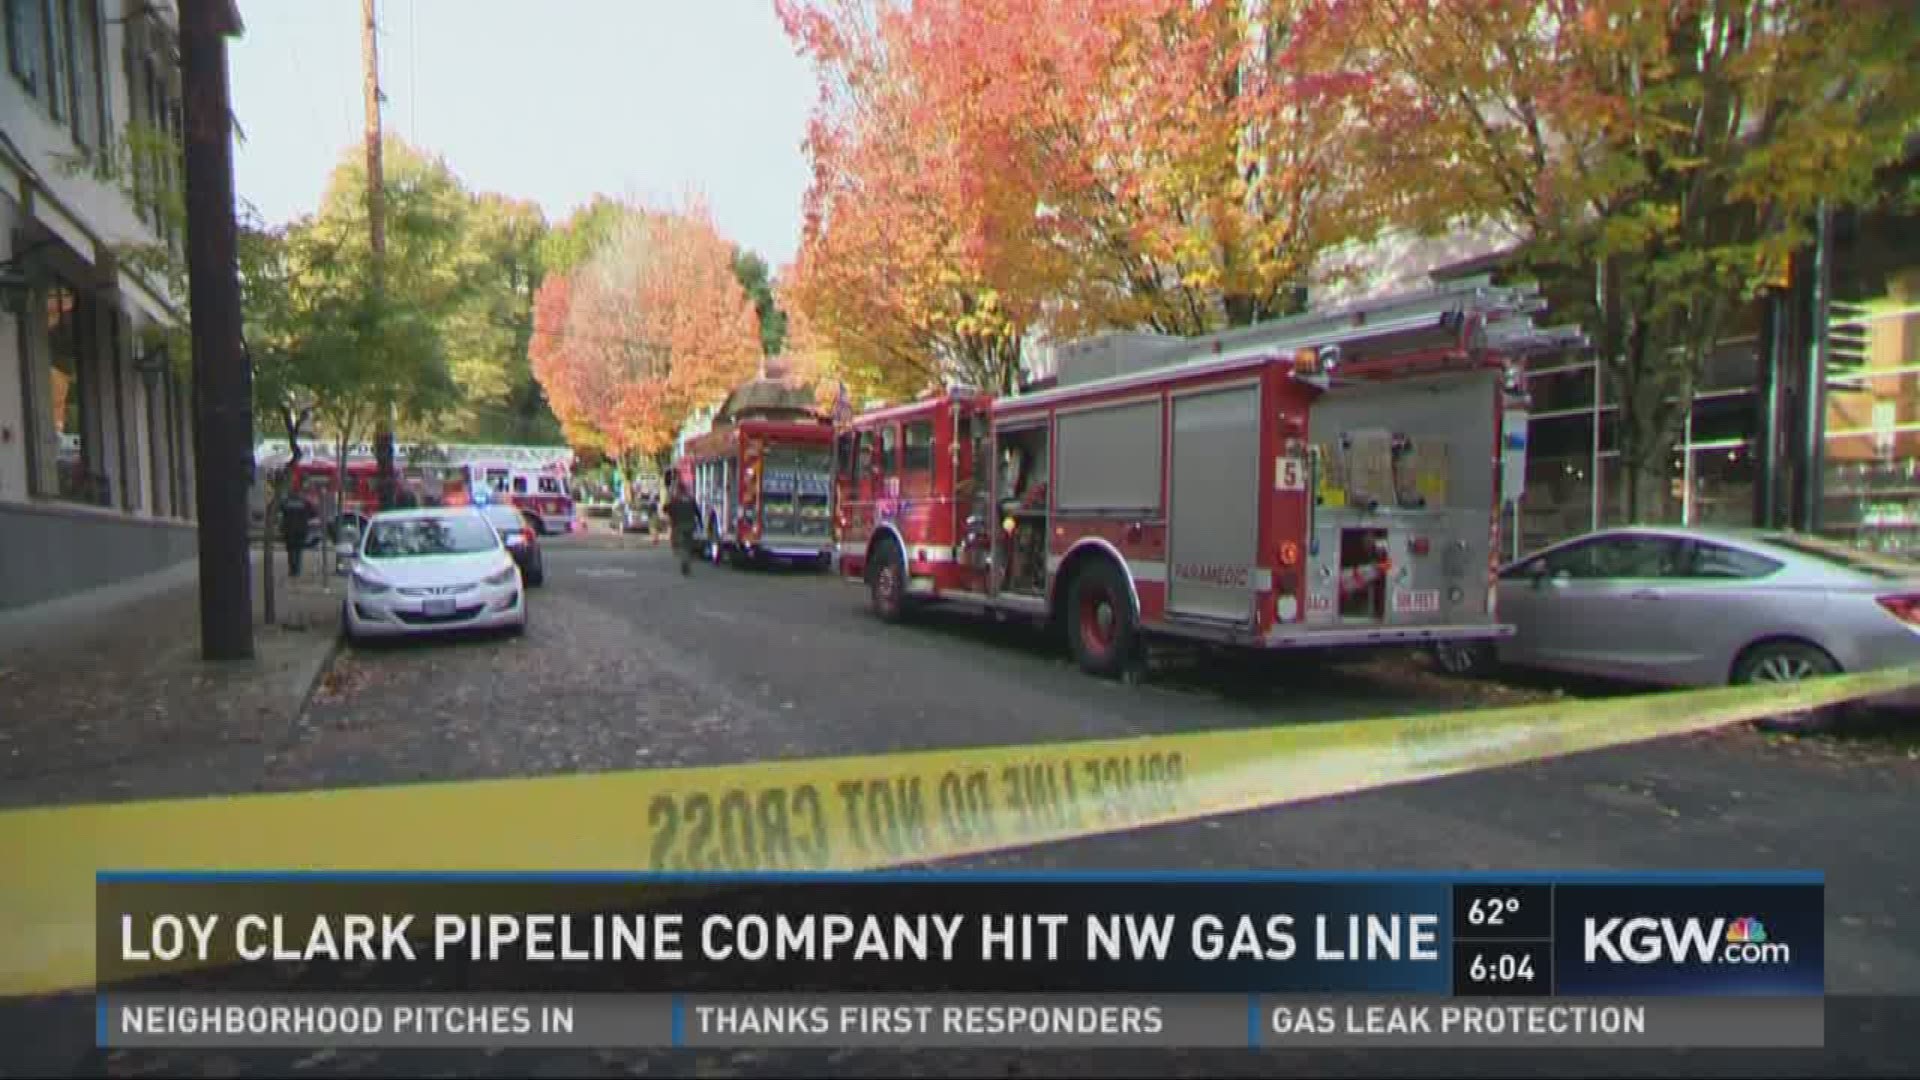 Loy Clark pipeline company hit NW gas line